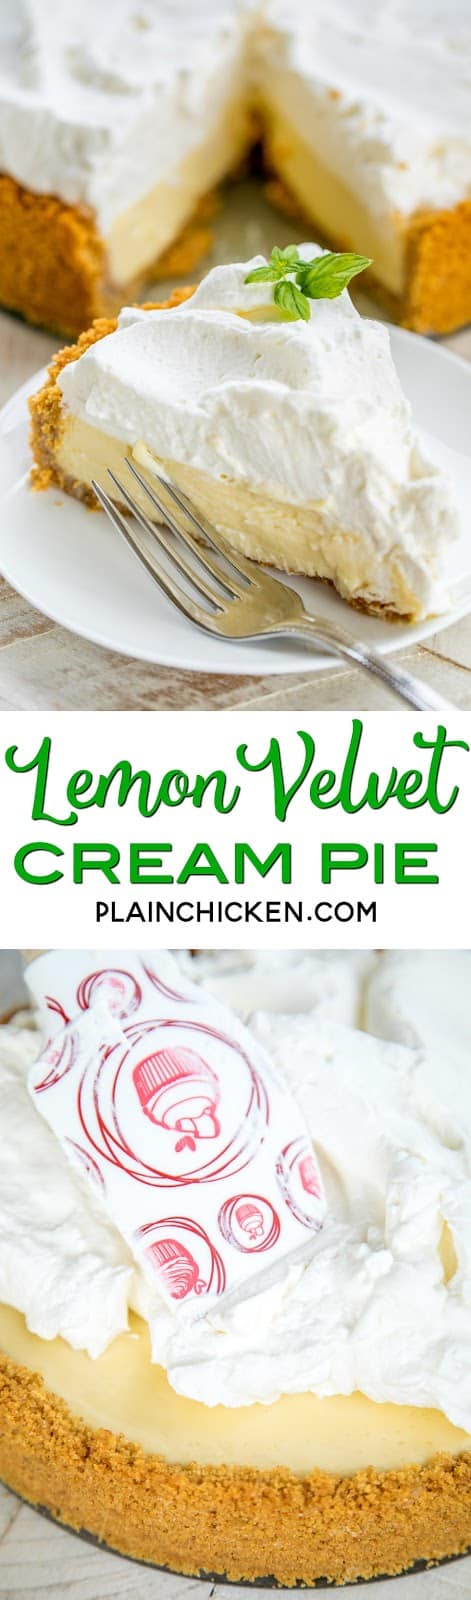 Lemon Velvet Cream Pie - hands down THE BEST lemon pie EVER!!! Everyone raves about this pie. Graham cracker crust, gelatin, egg yolks, sweetened condensed milk, whipping cream and lemon juice, powdered sugar. Can make a day or two in advance and top with fresh whipped cream before serving. I wanted to lick my plate! A must for all your holidays and dinner parties! #pie #dessert #lemonpie